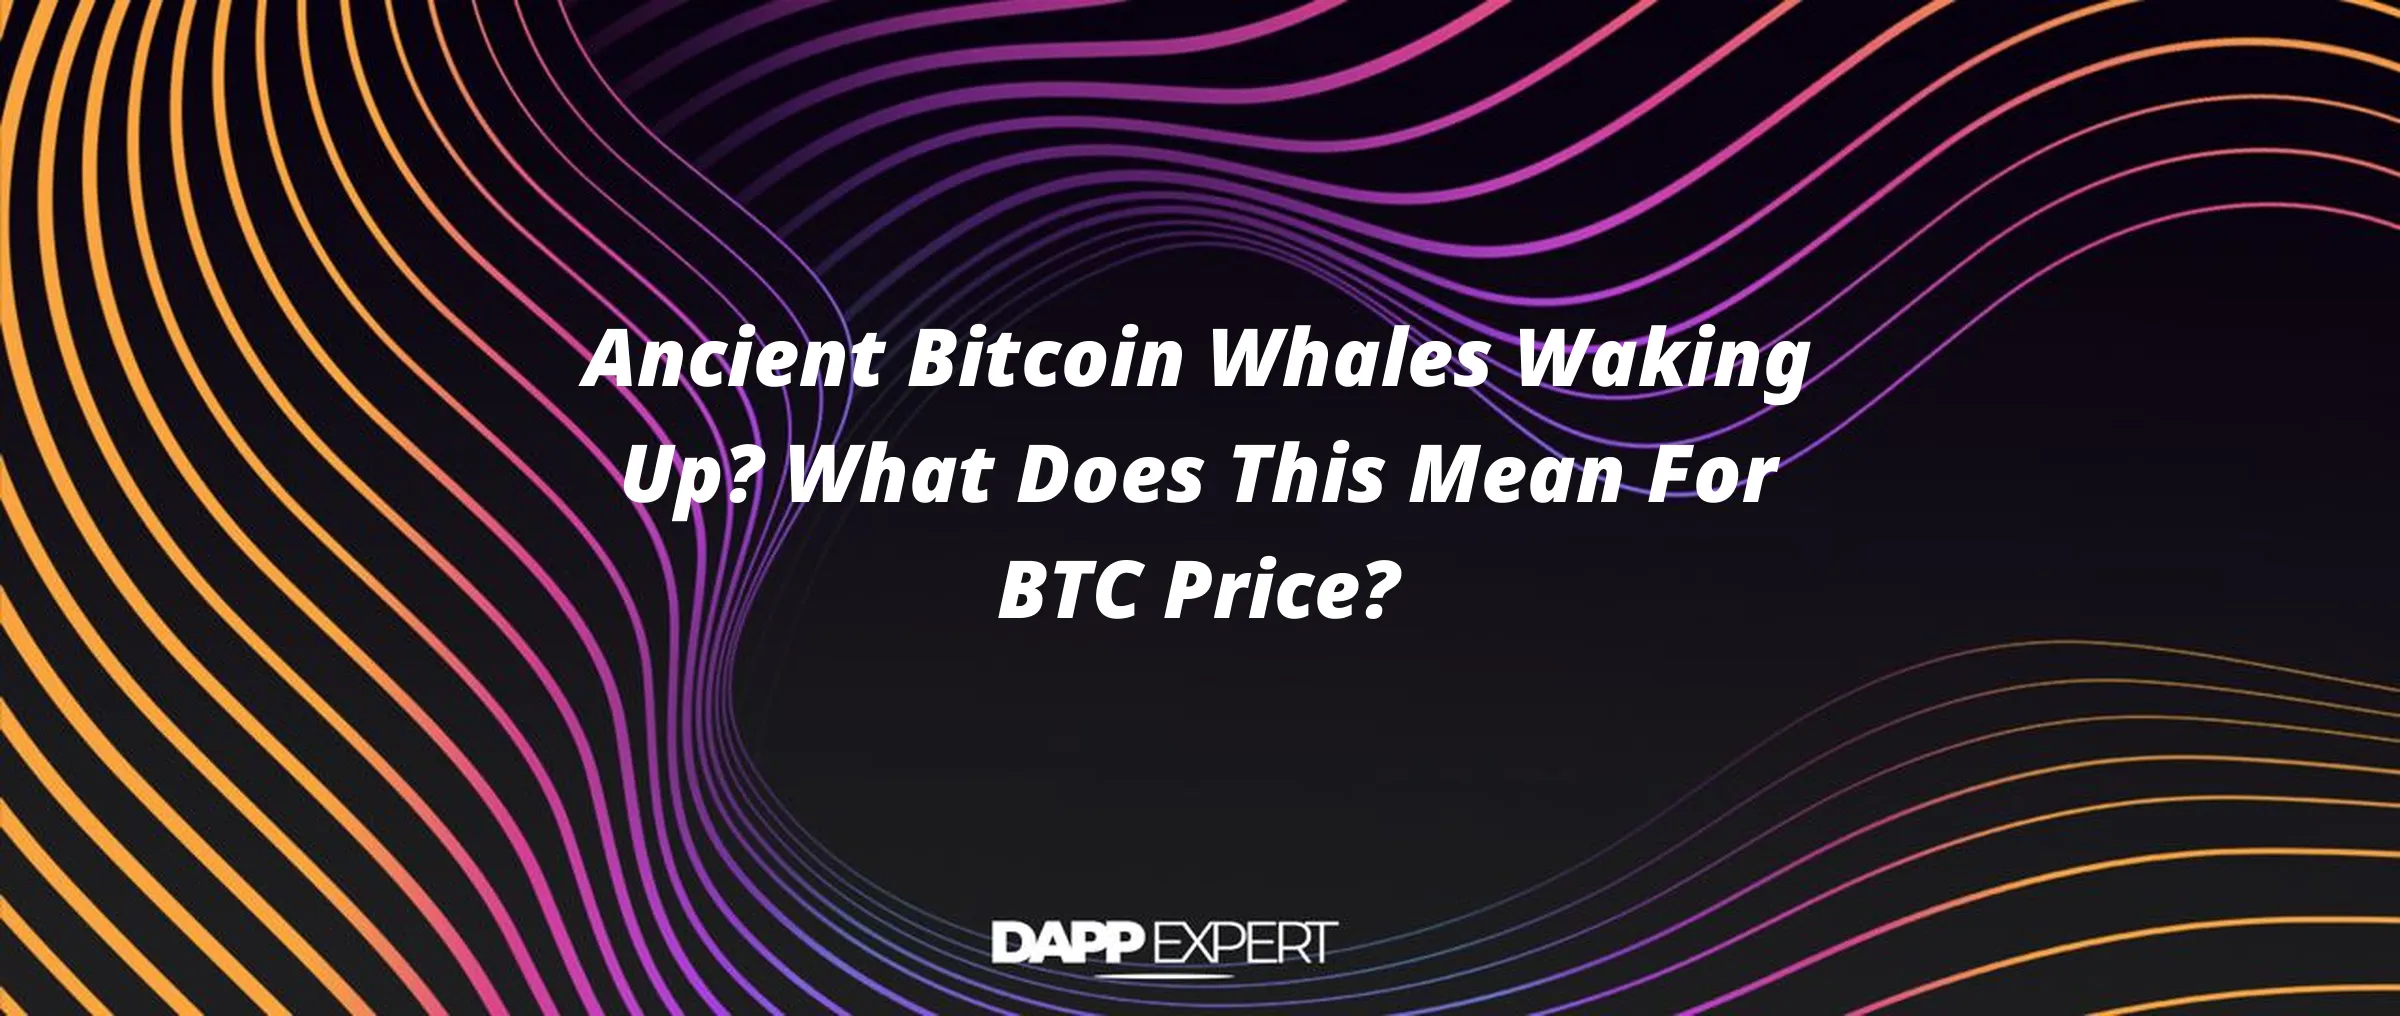 Ancient Bitcoin Whales Waking Up? What Does This Mean For BTC Price?